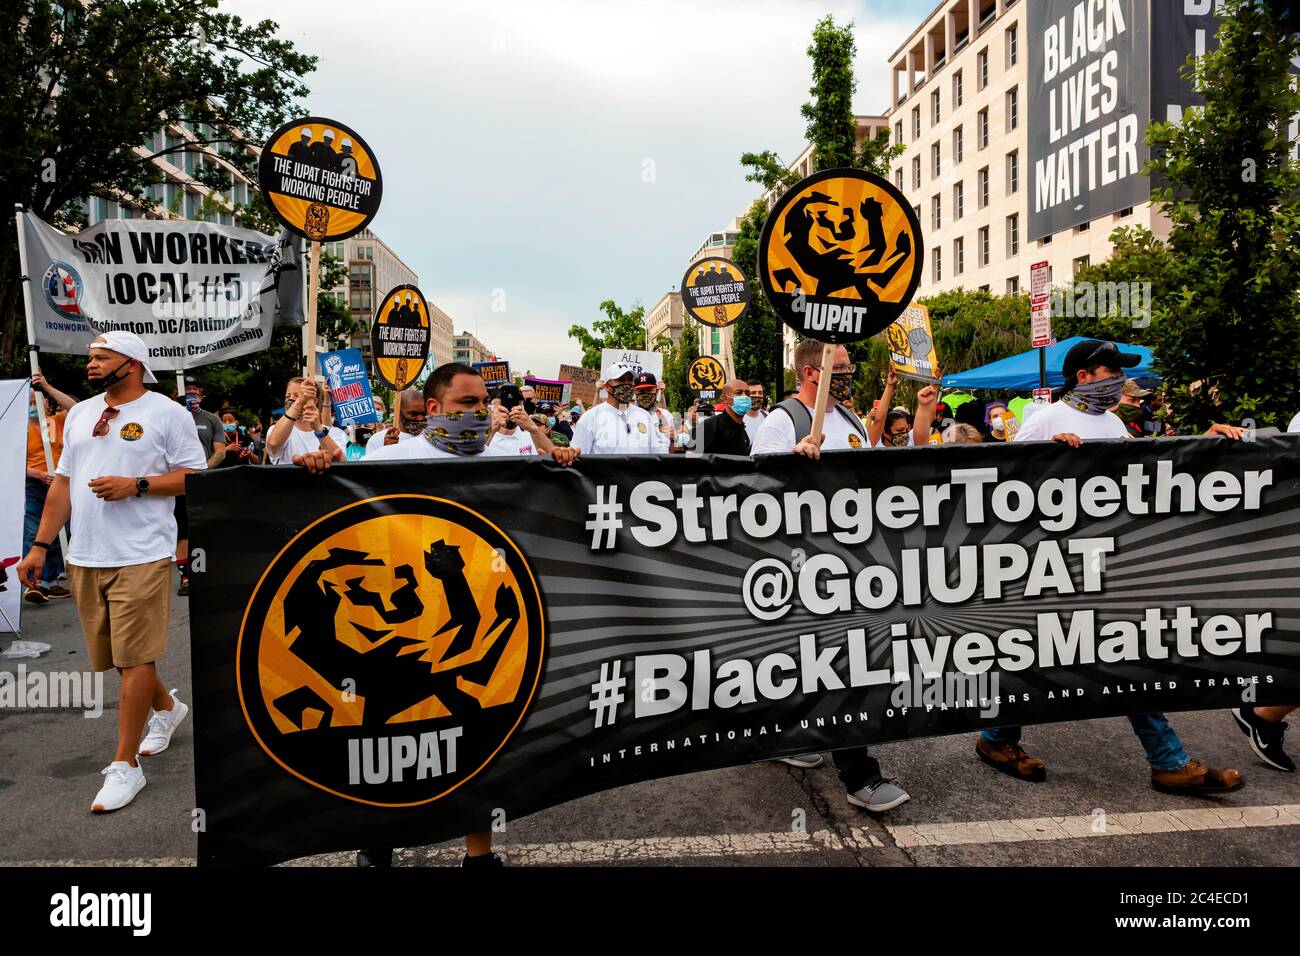 IUPAT Labor Union march through Black Lives Matter Plaza in protest of police brutality during Juneteenth festivities, Washington, DC, United States Stock Photo